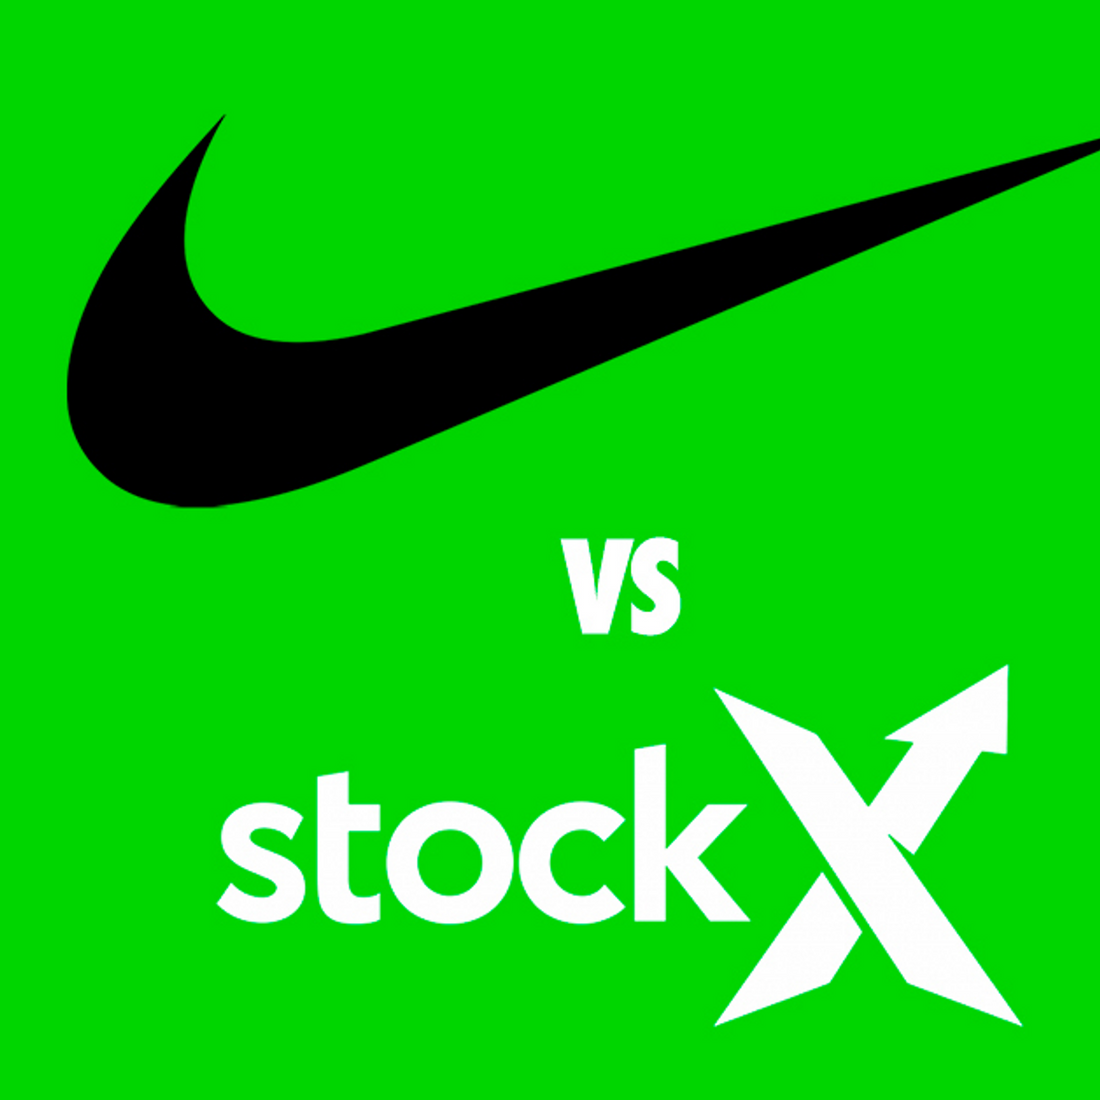 Nike and StockX.com: A Look at the Court Case